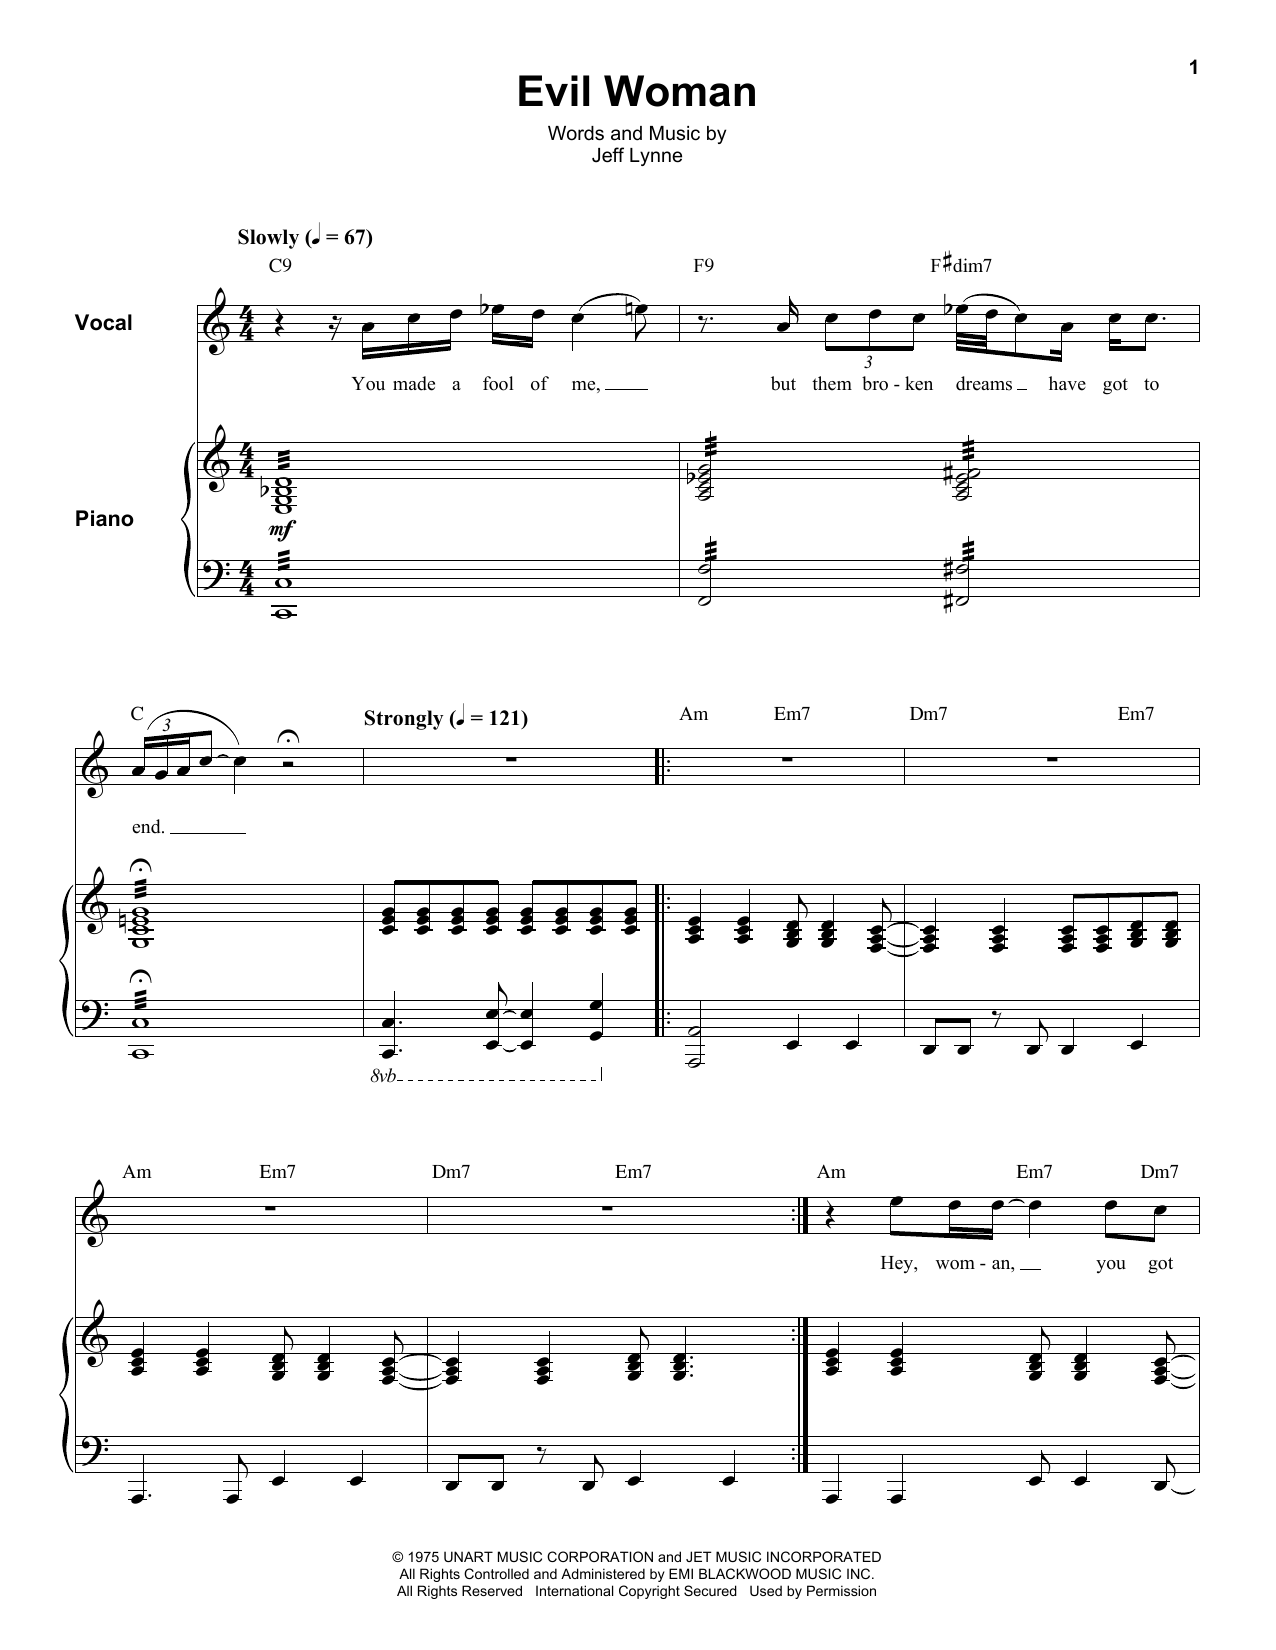 Download Electric Light Orchestra Evil Woman Sheet Music